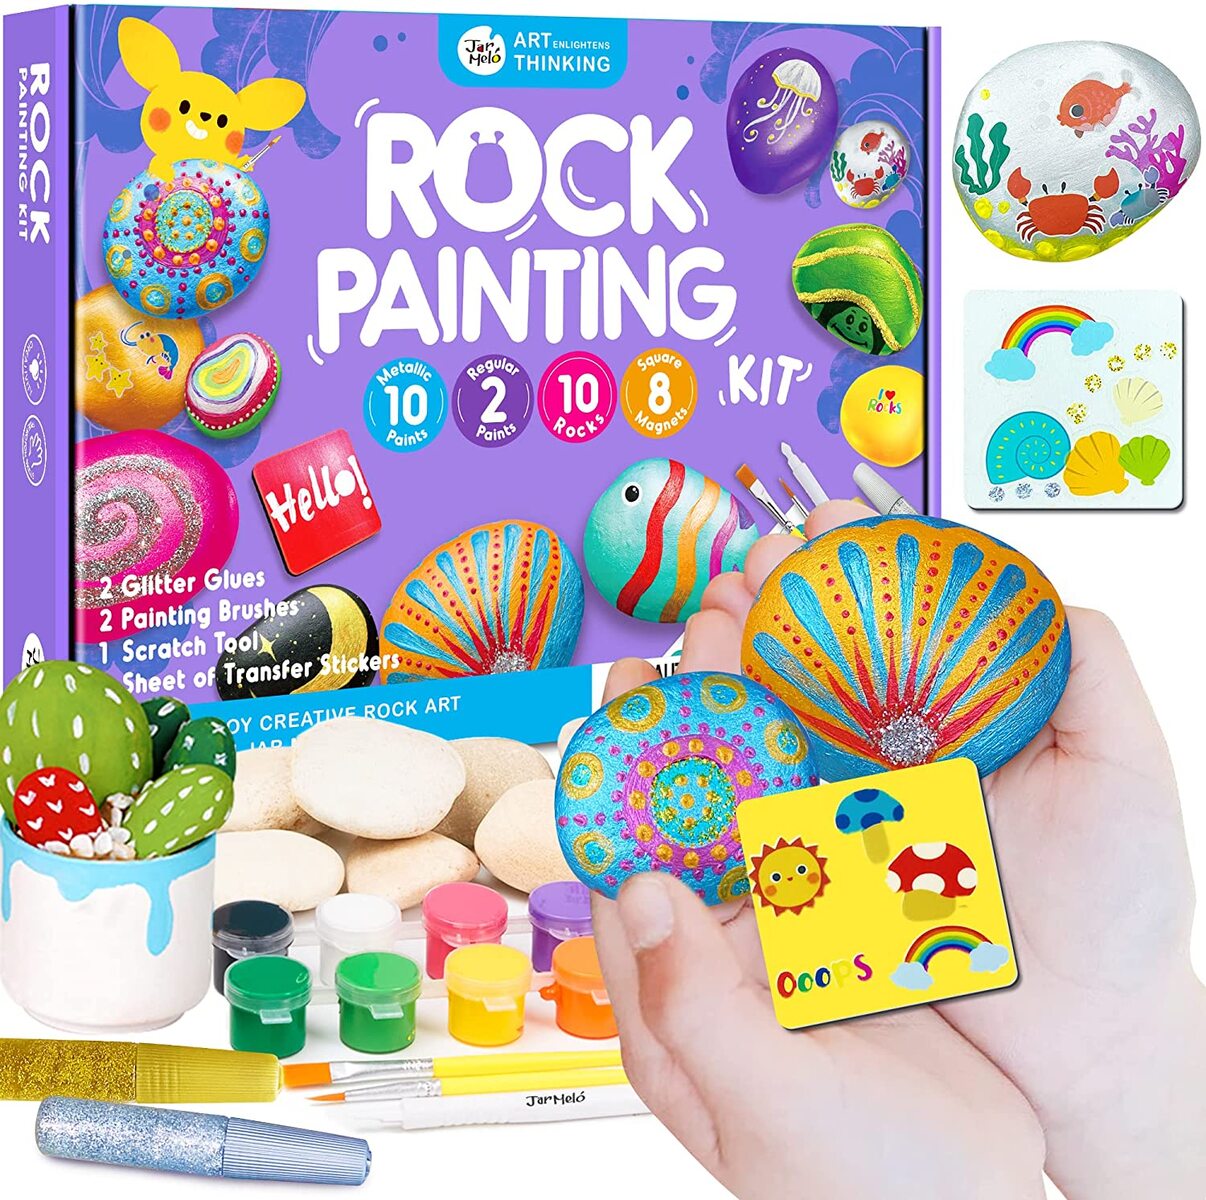 Rock Painting With Metallic Paints & Glitter Glues